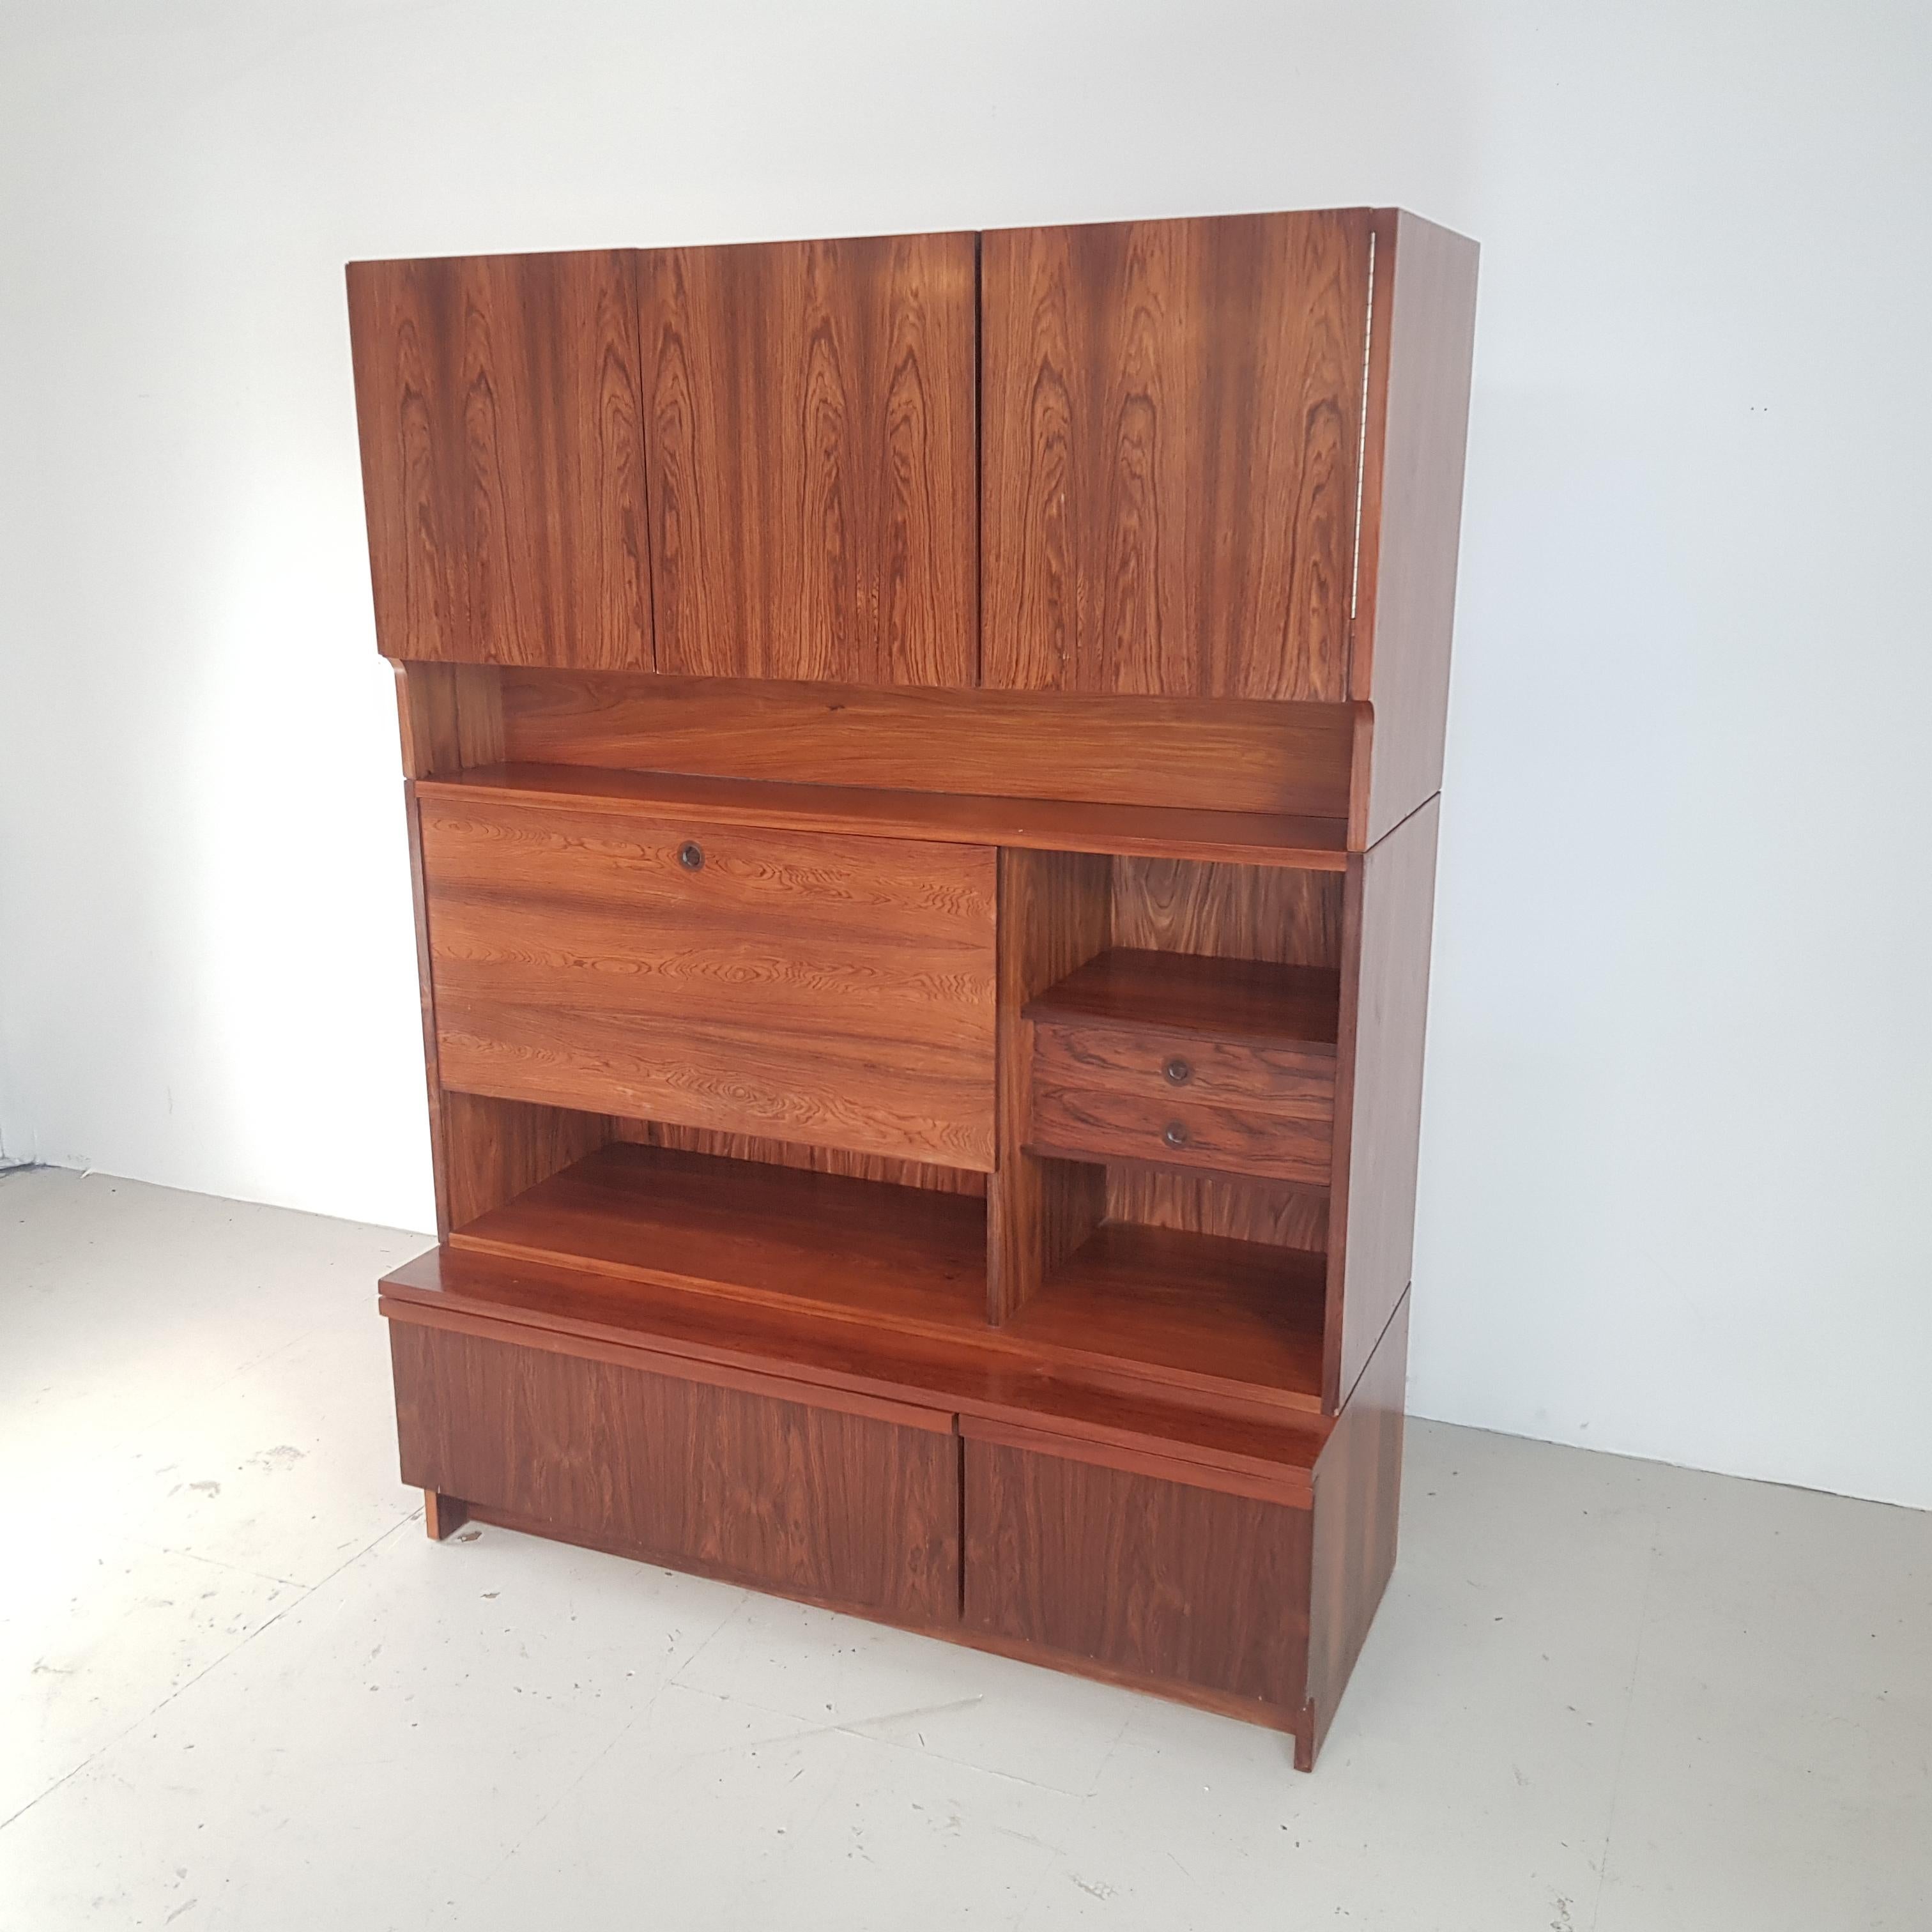 Fantastic rosewood wall unit sold in Heals by Robert Heritage for Archie Shine.
Designed by Robert Heritage in 1957 and produced by Archie Shine this large sideboard or wall unit has 3 doors along plus multiple drawers and sliding or folding down